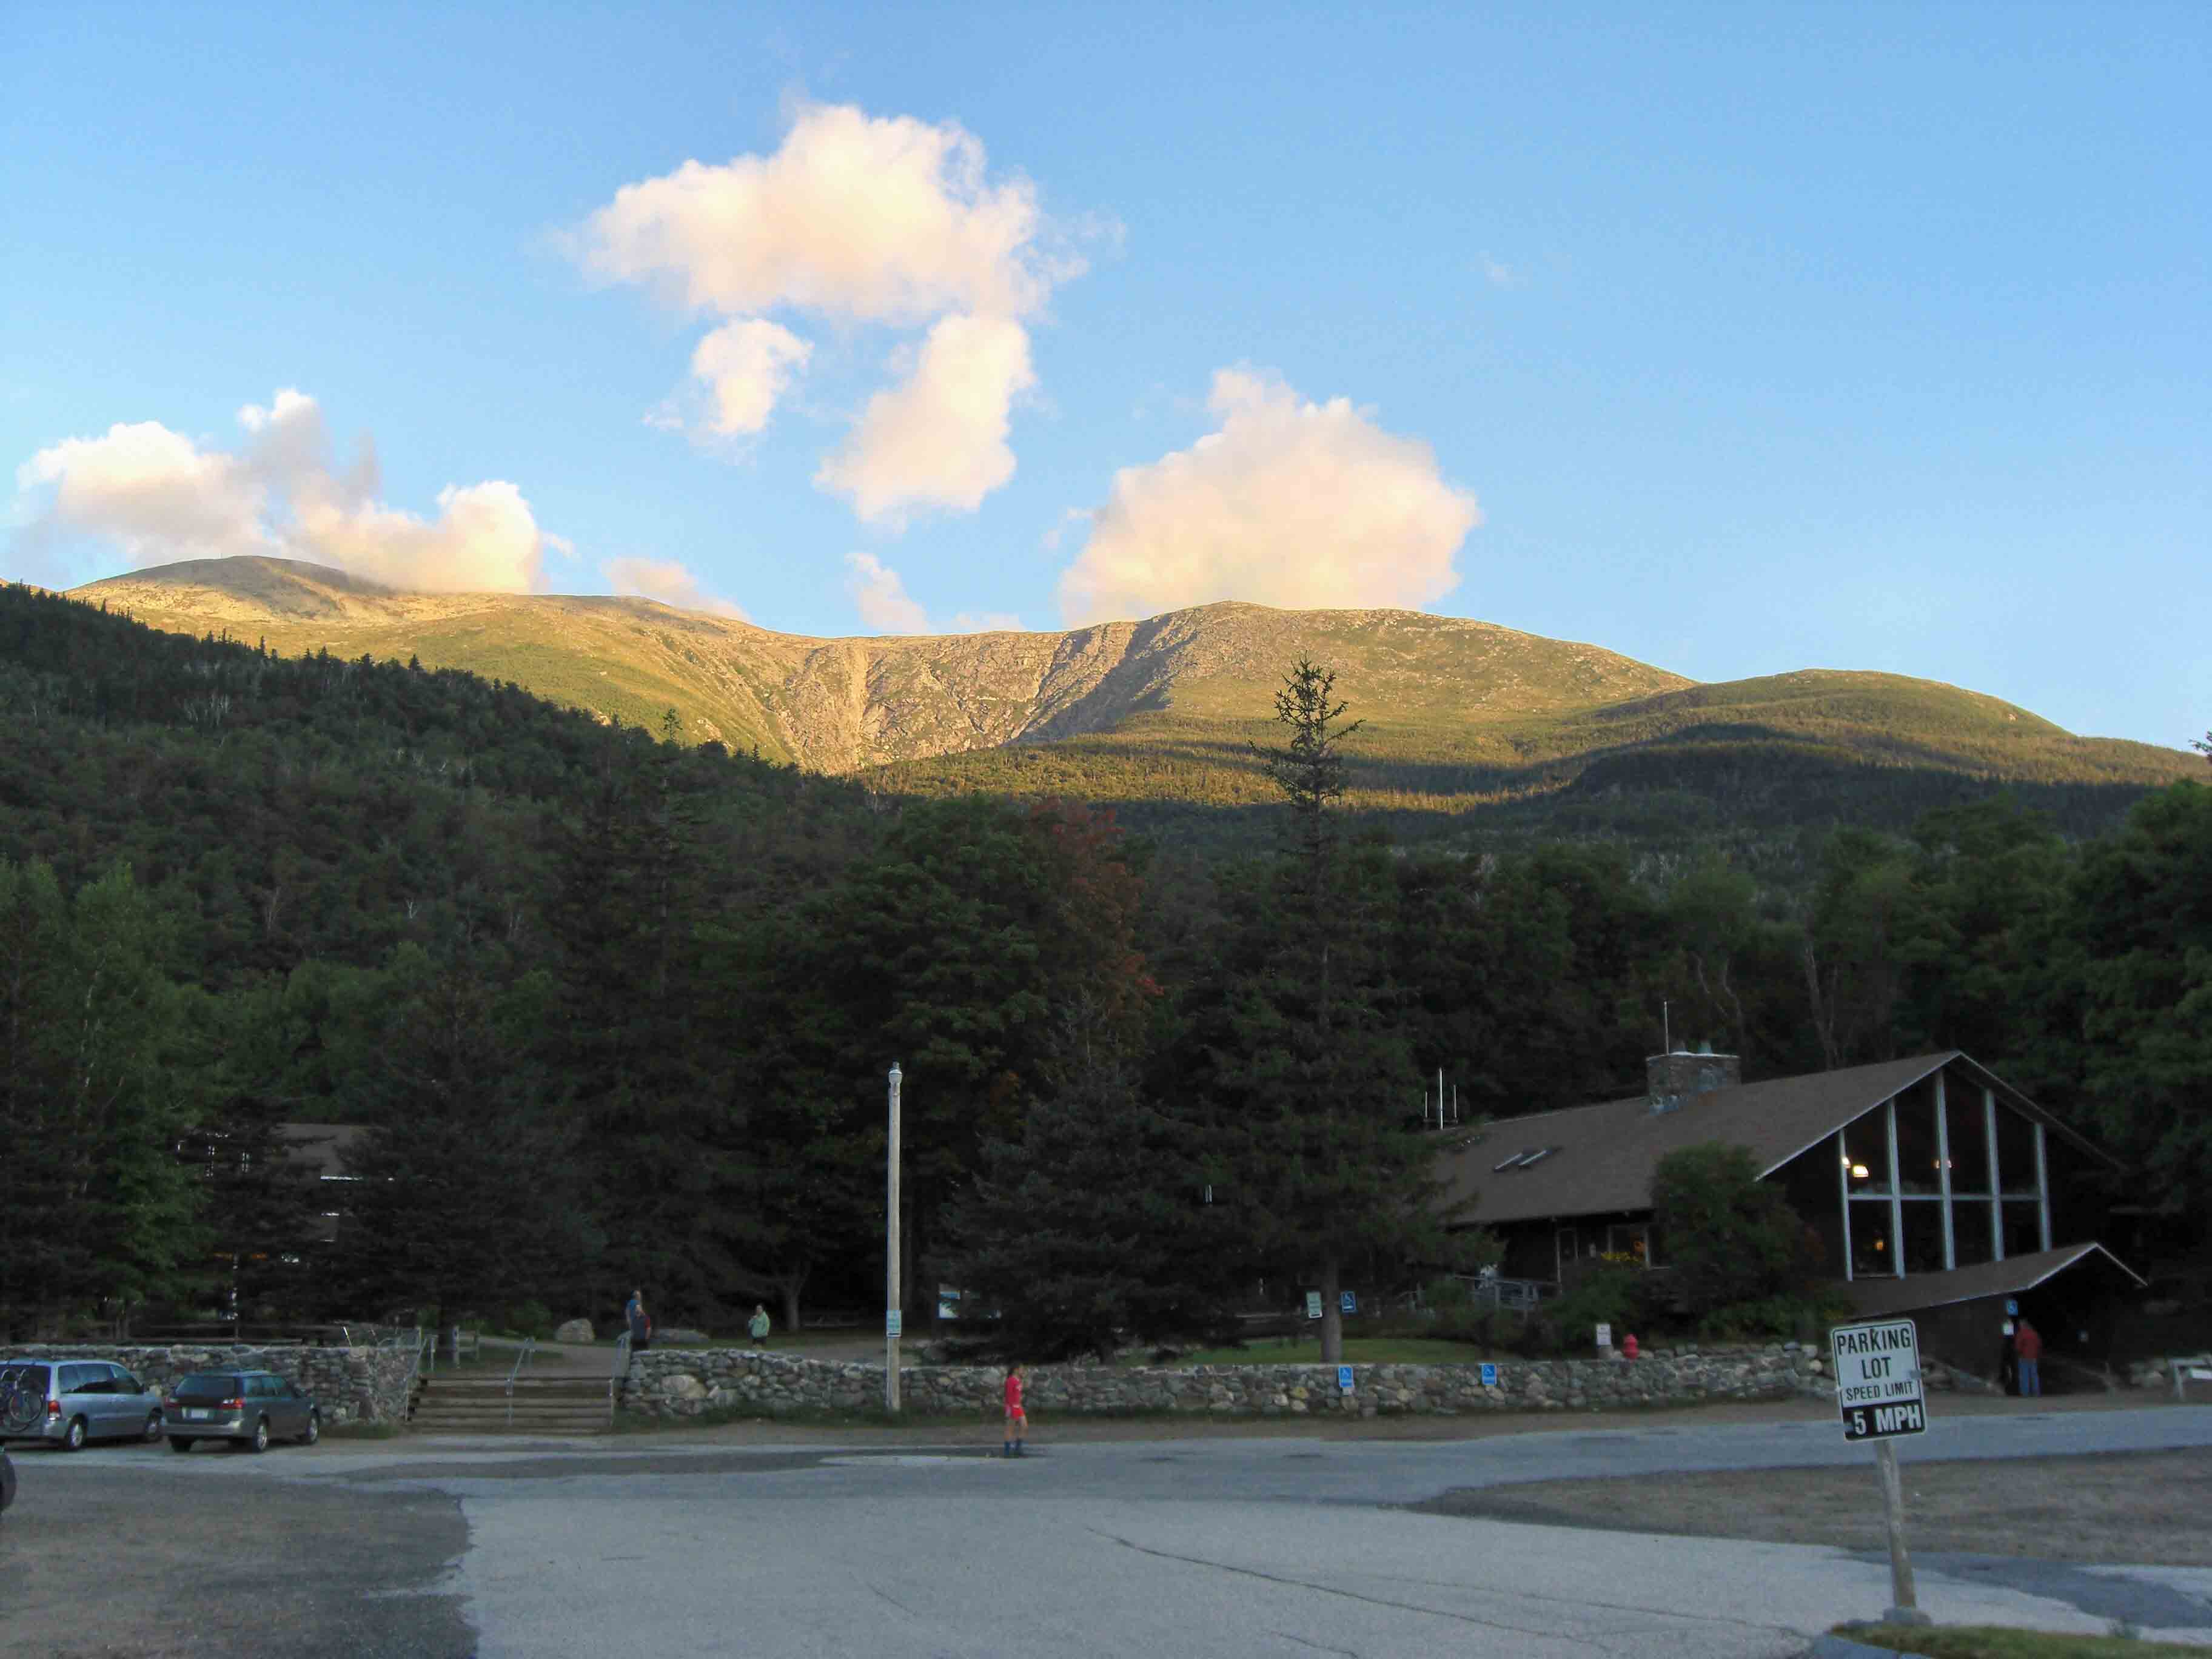 MM 0.0 - Early morning picture at Pinkham Notch Visitor Center. Huntington's Ravine and Mt. Washington are in the background. Most of the parking is to the left of this picture.  Courtesy seqatt.net@sbcglobal.net